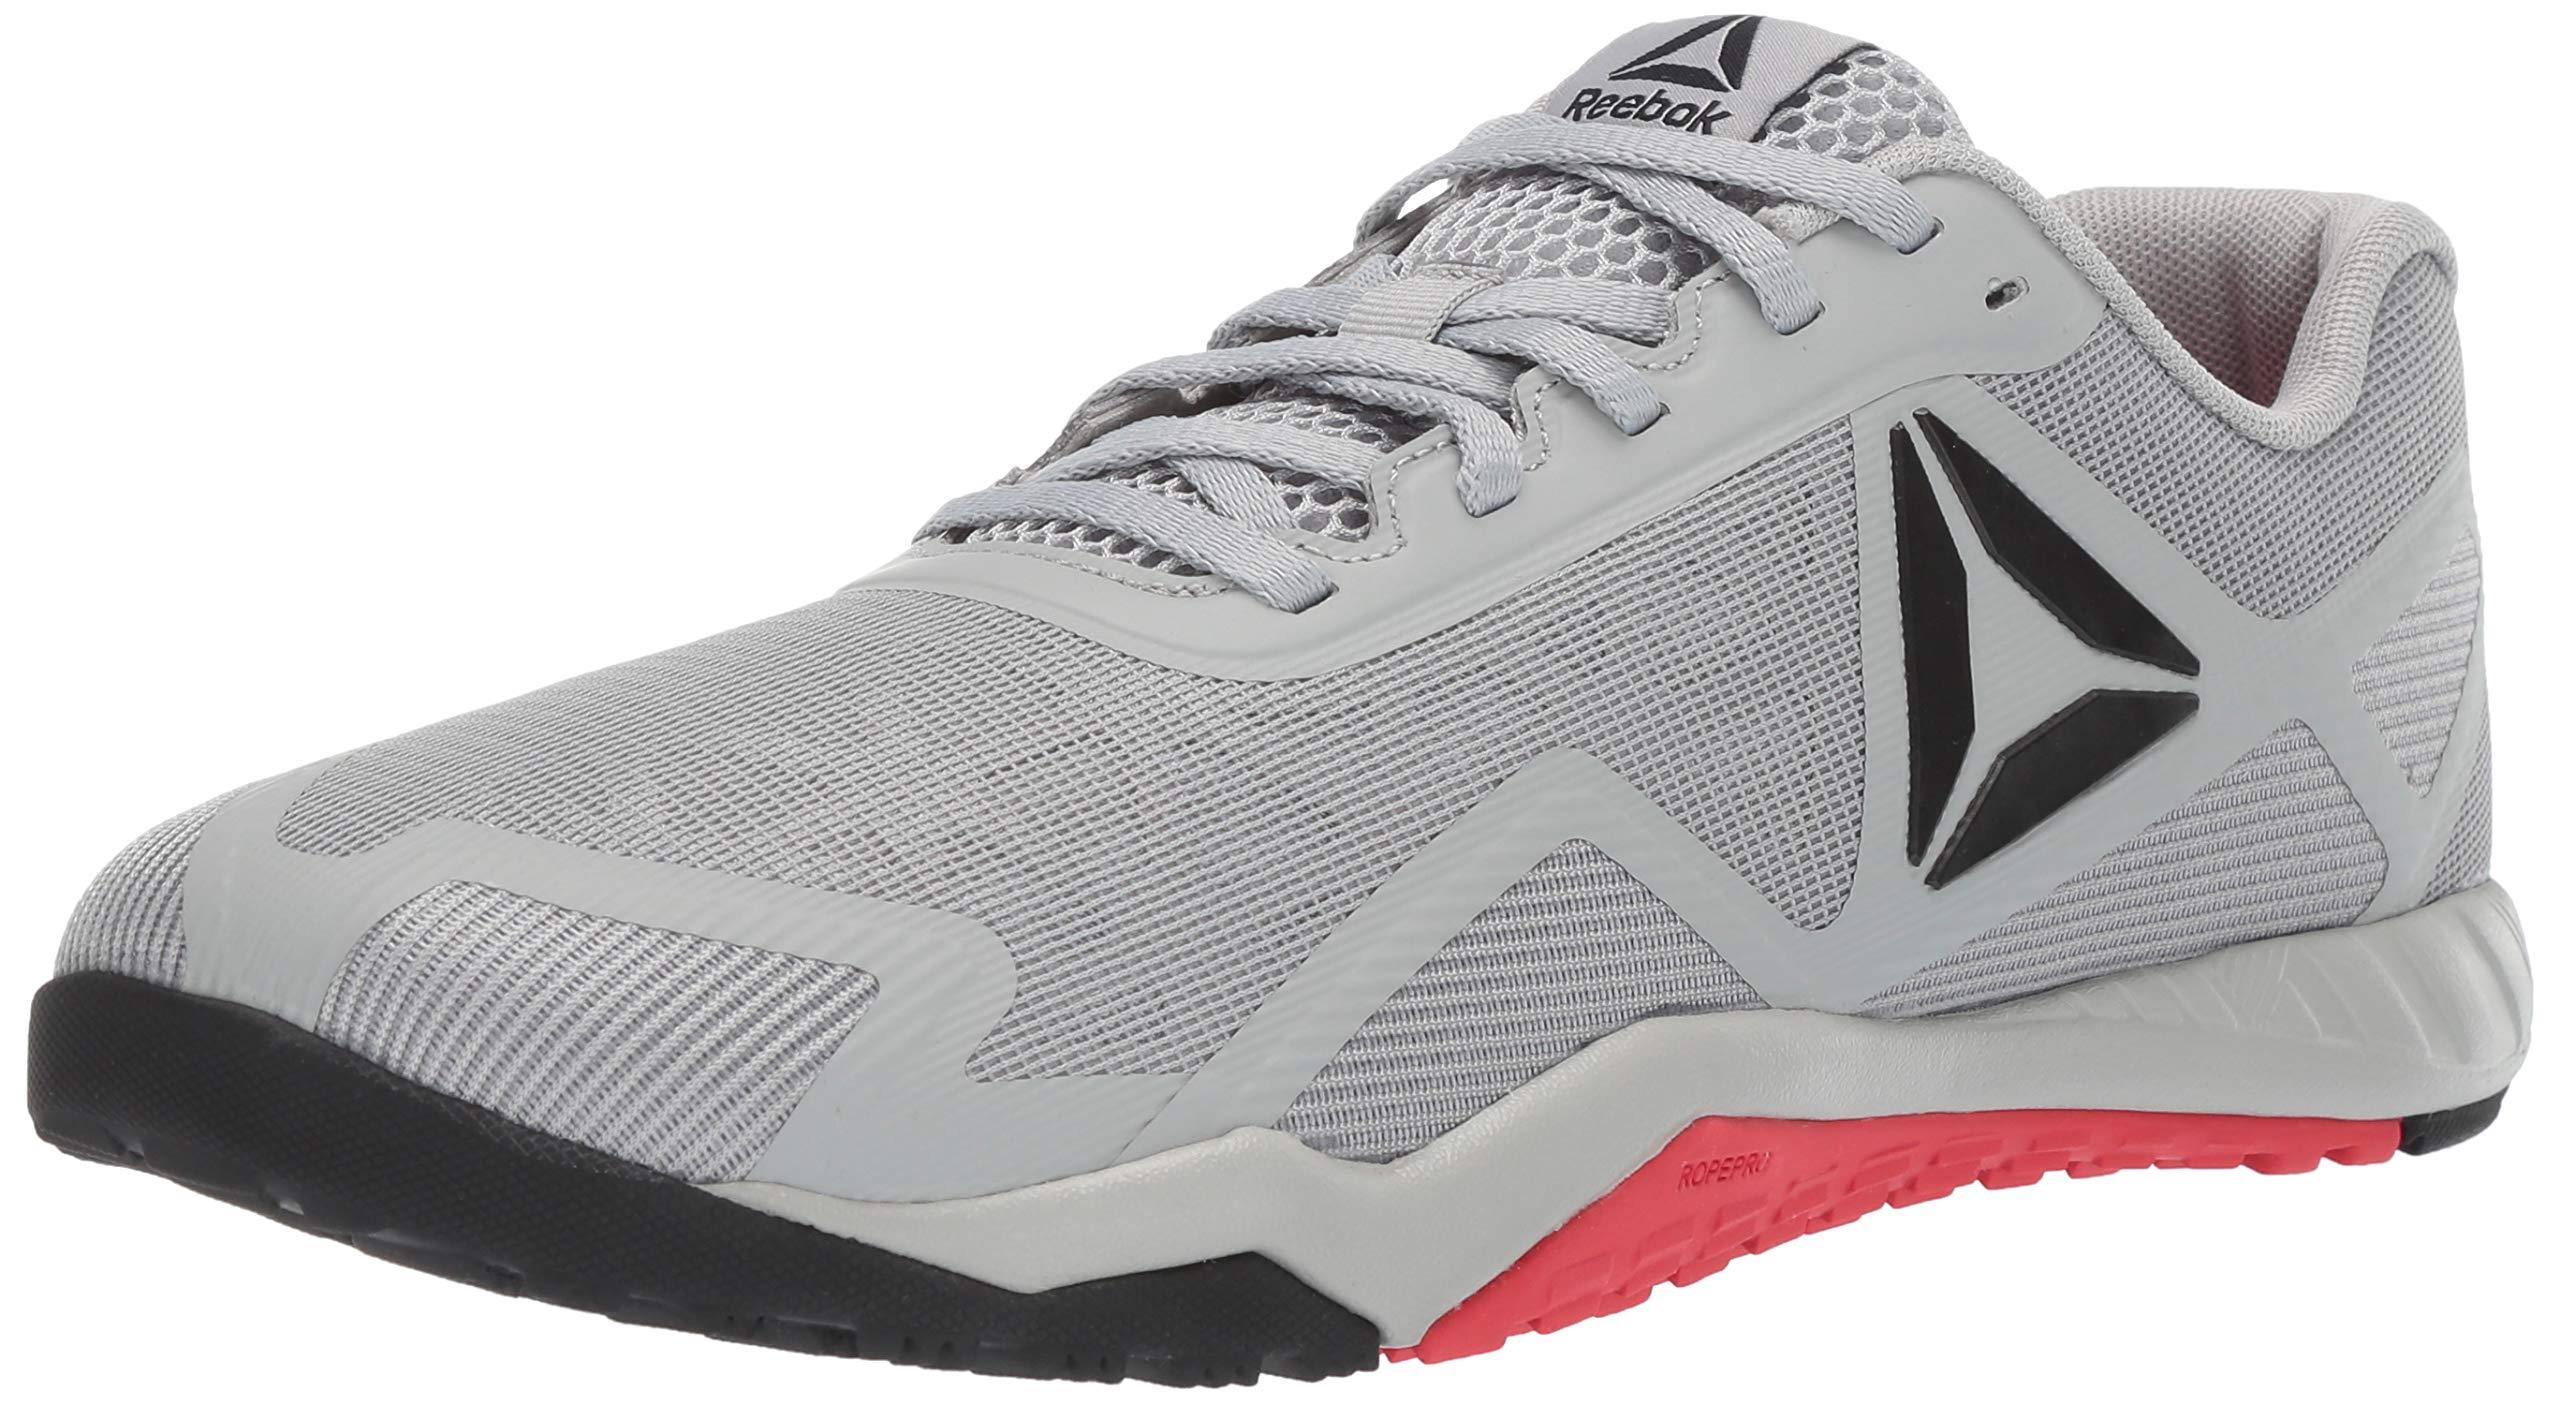 the new reebok workout tr, Off 79%, www.iusarecords.com